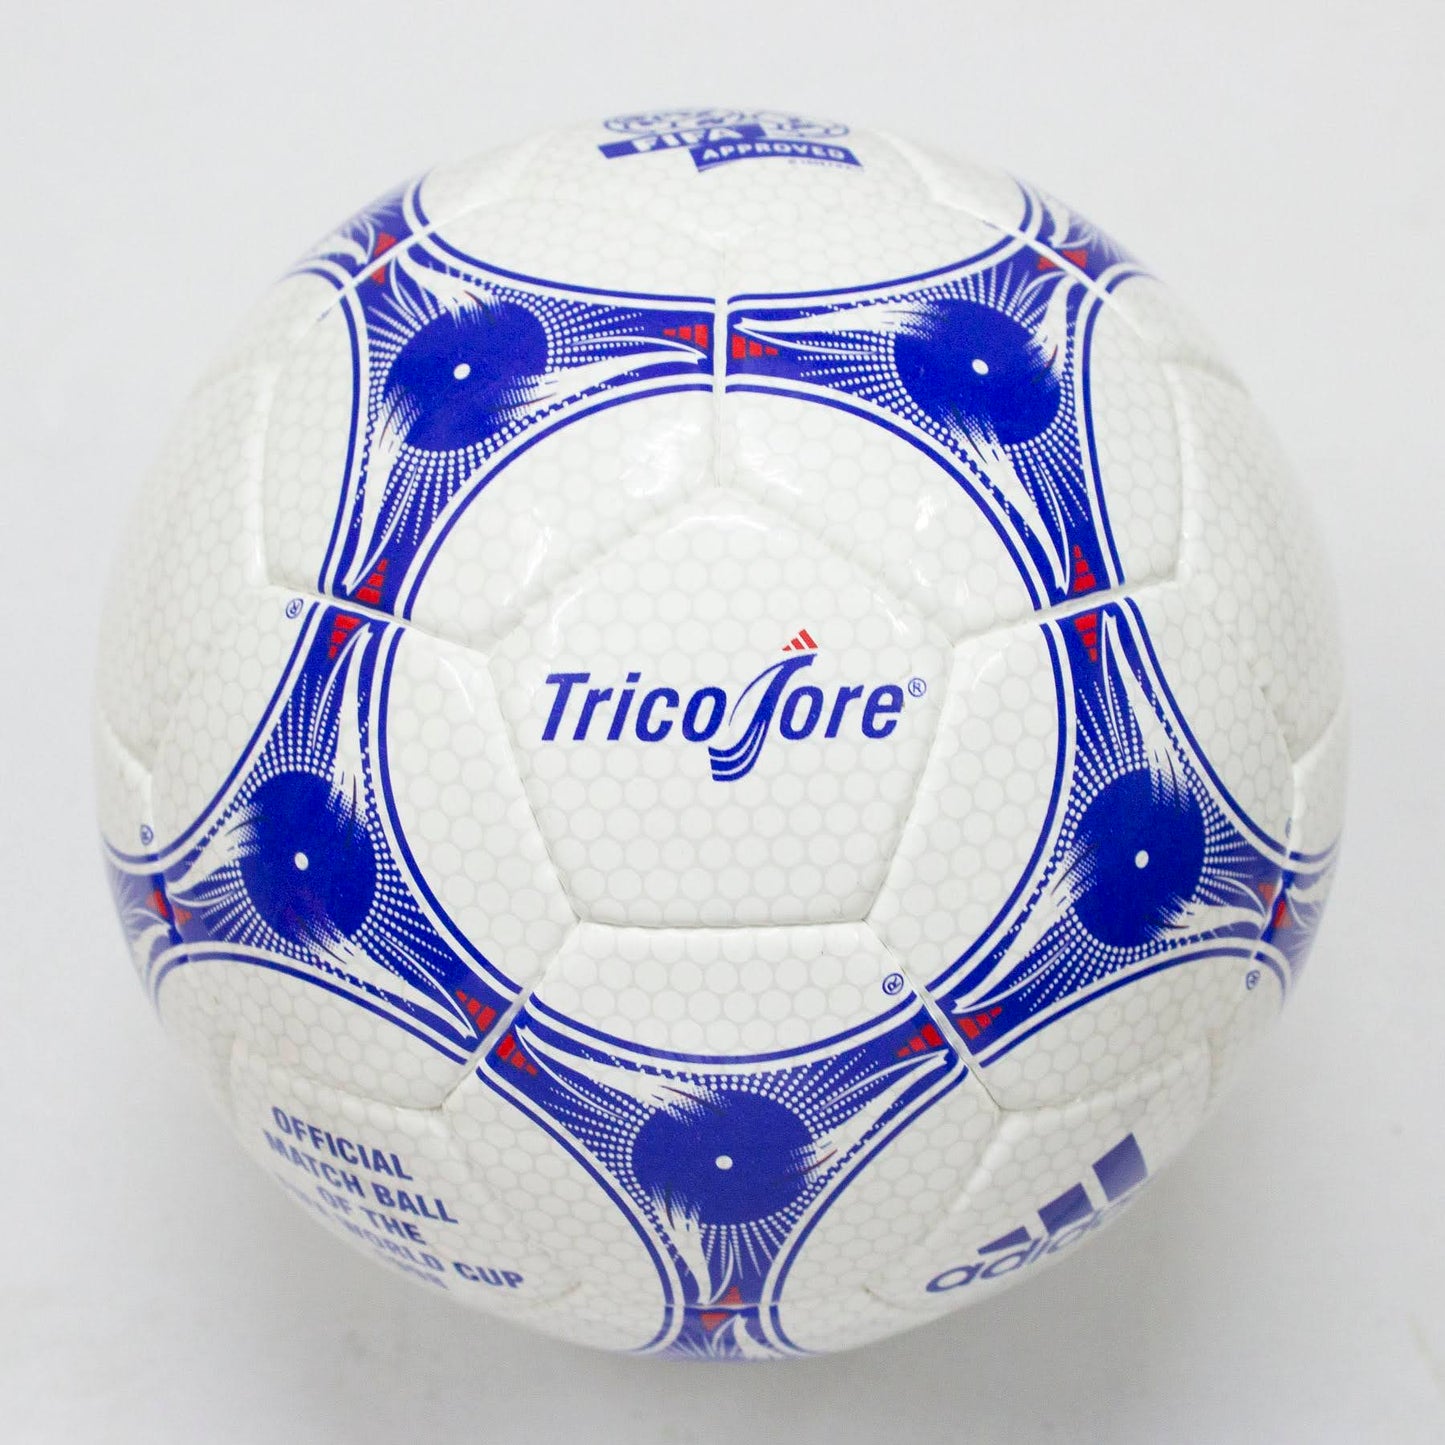 Adidas Tricolore | 1998 FIFA World Cup Ball | SIZE 5 01